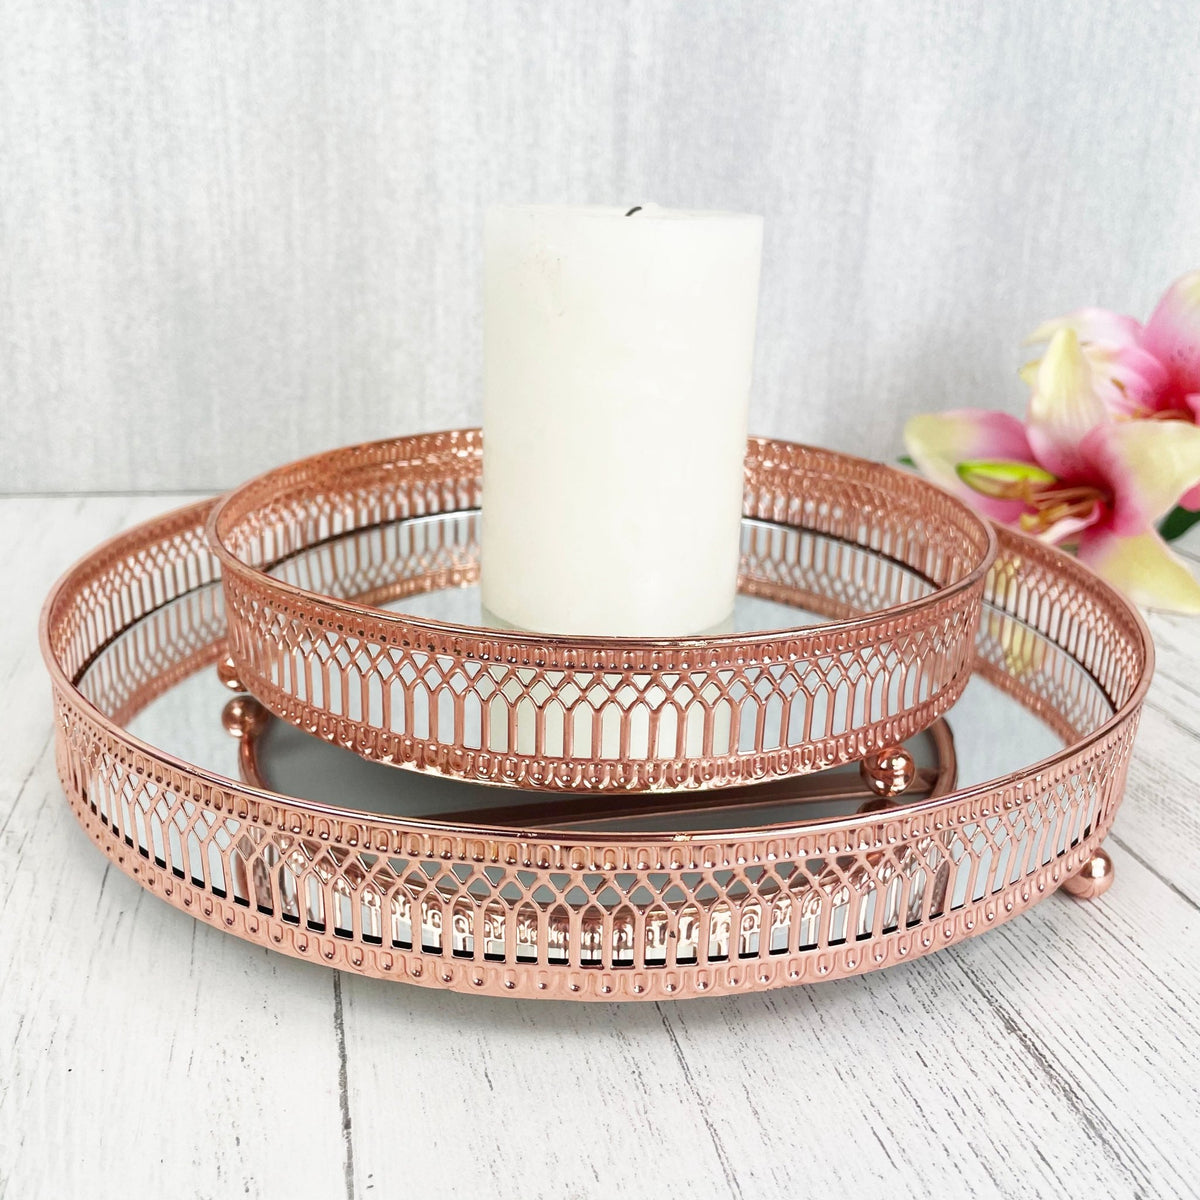 Regiis Copper Style Mirror Tray set of 2 close up, with candle